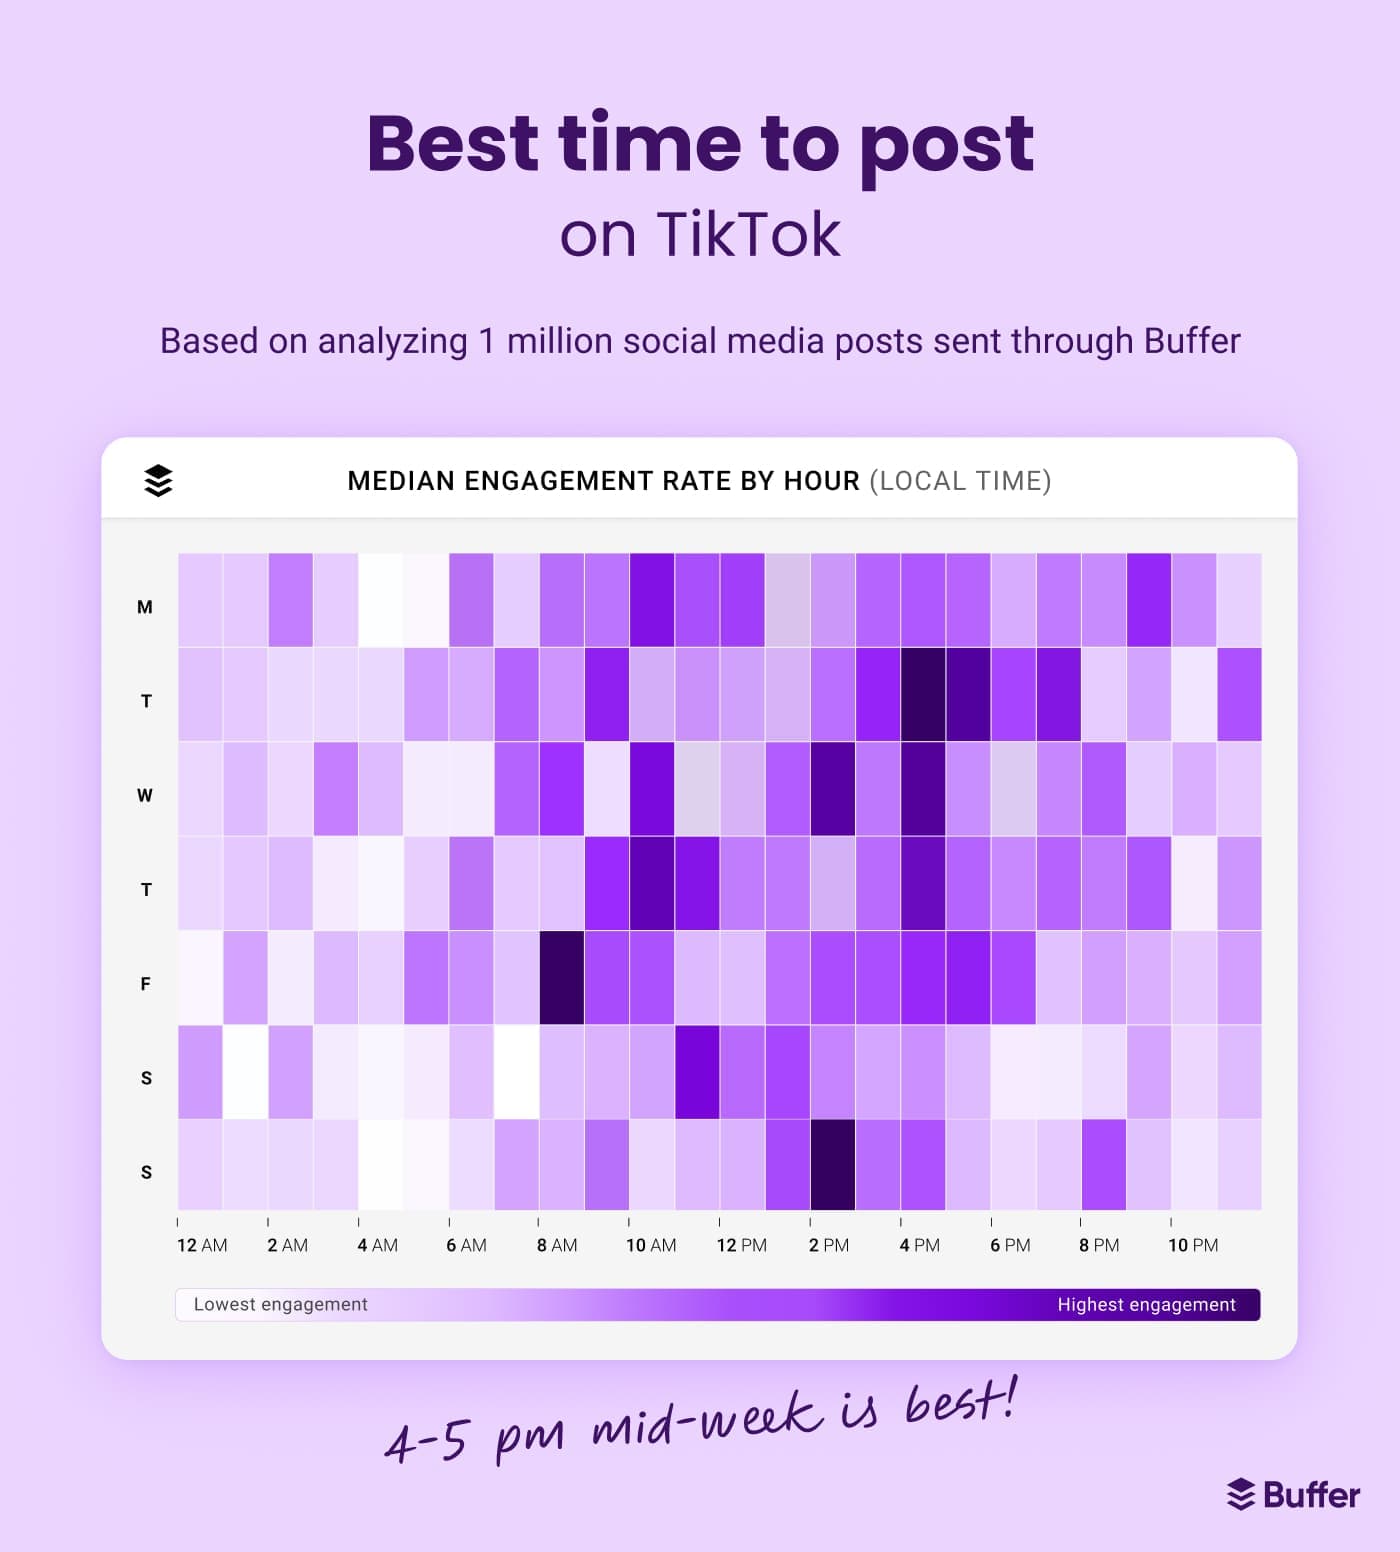 Heatmap charting the best time to post on TikTok based on analyzing 1 million social media posts sent through Buffer. 4pm to 5pm mid-week is best.